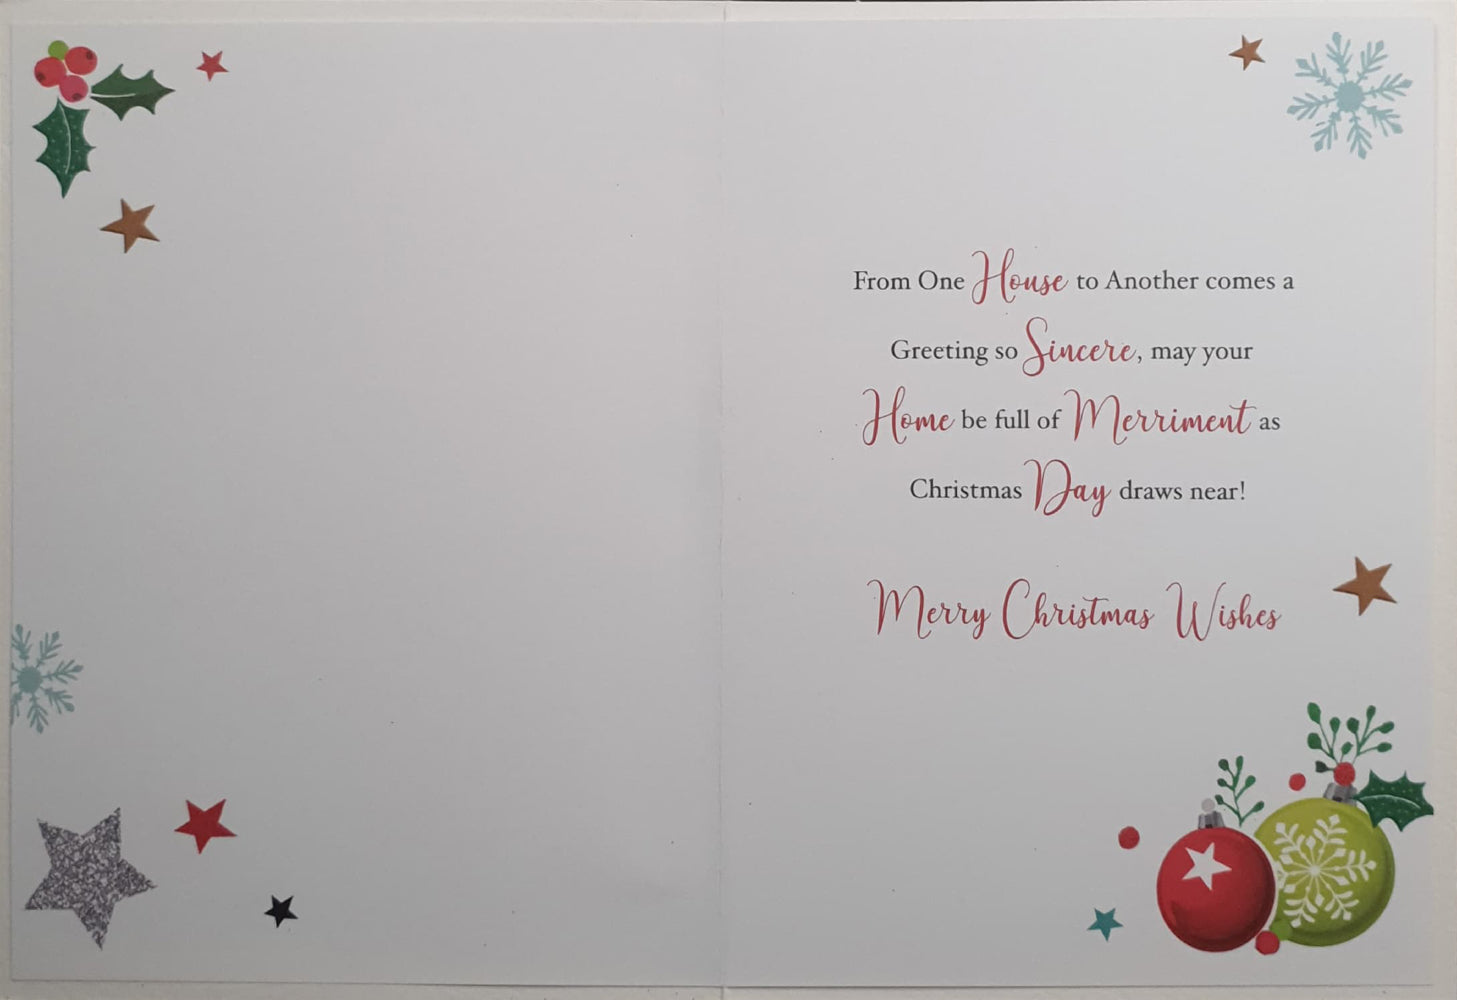 From Our House To Yours Christmas Card - Cute Dogs & Cat at Red Post Box